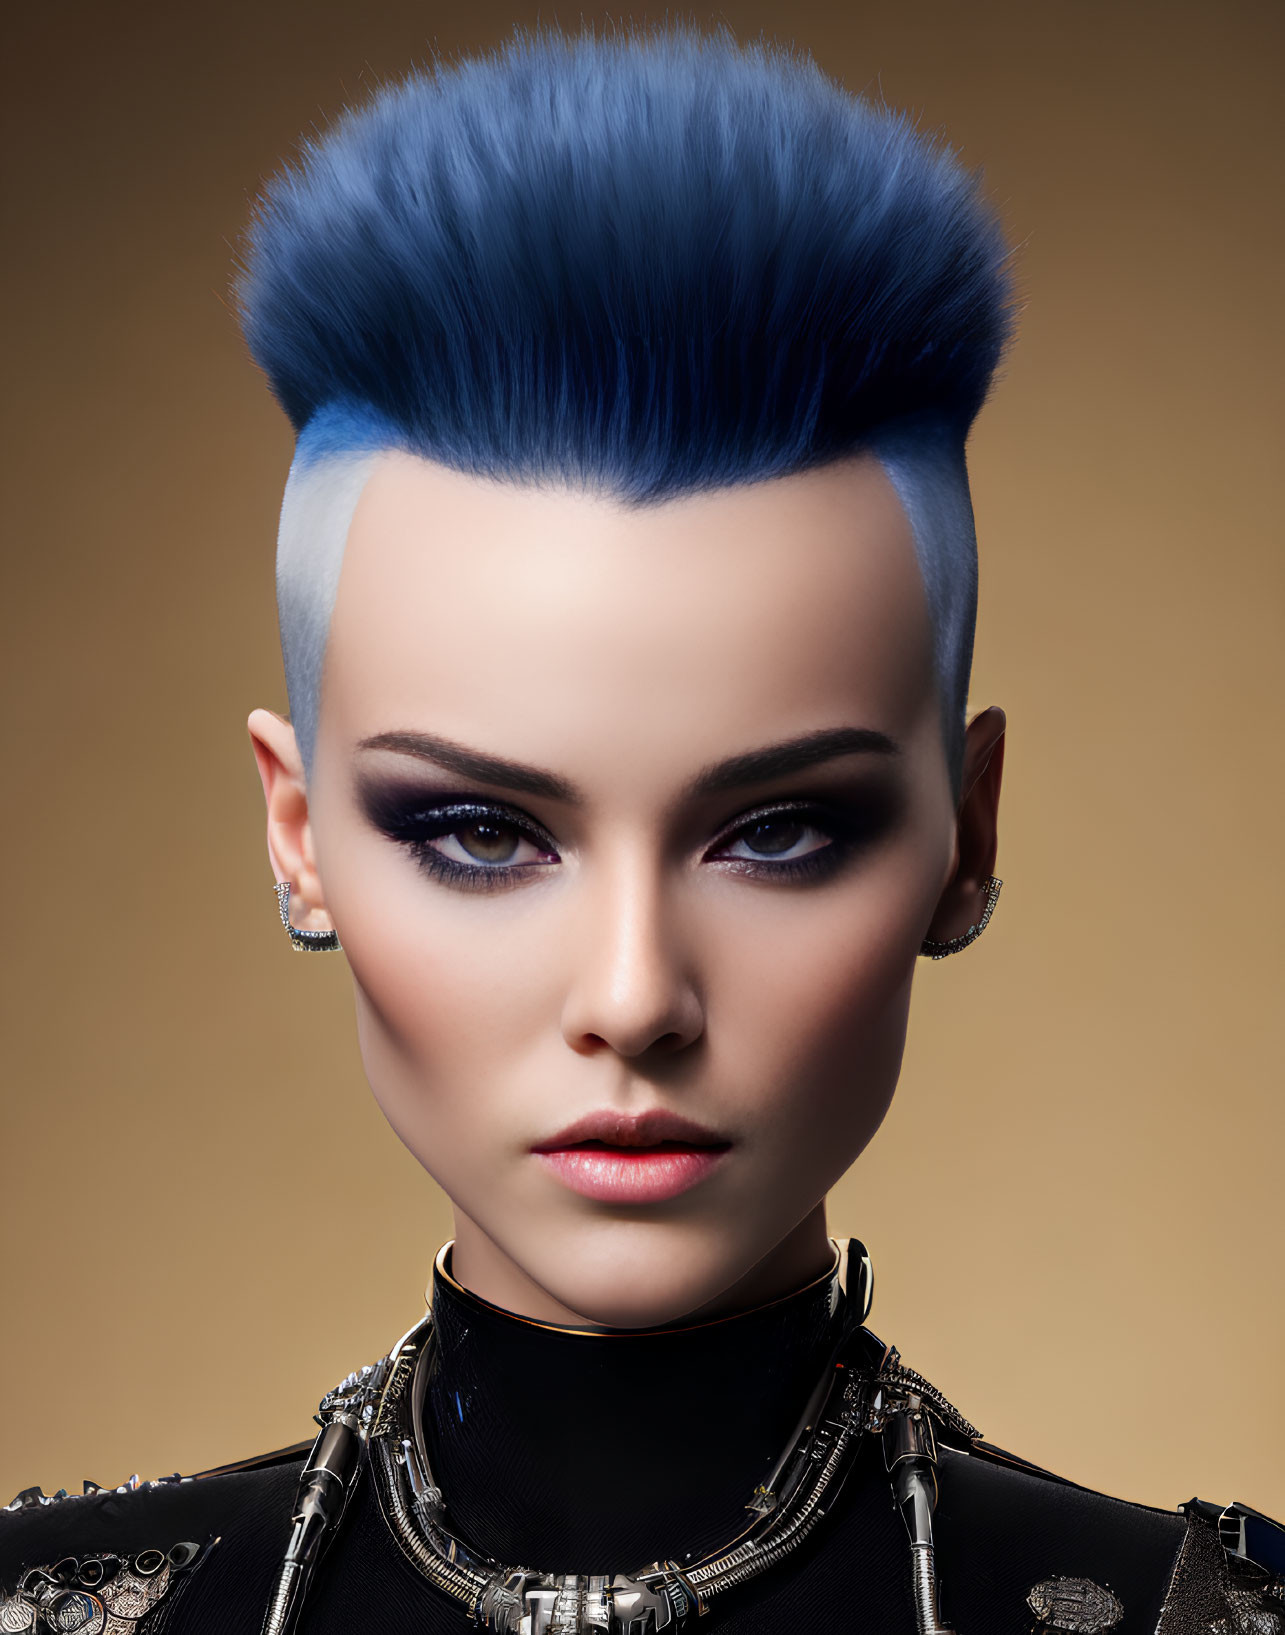 Striking Blue Flat Top Hairstyle with Bold Makeup & Metallic Black Outfit